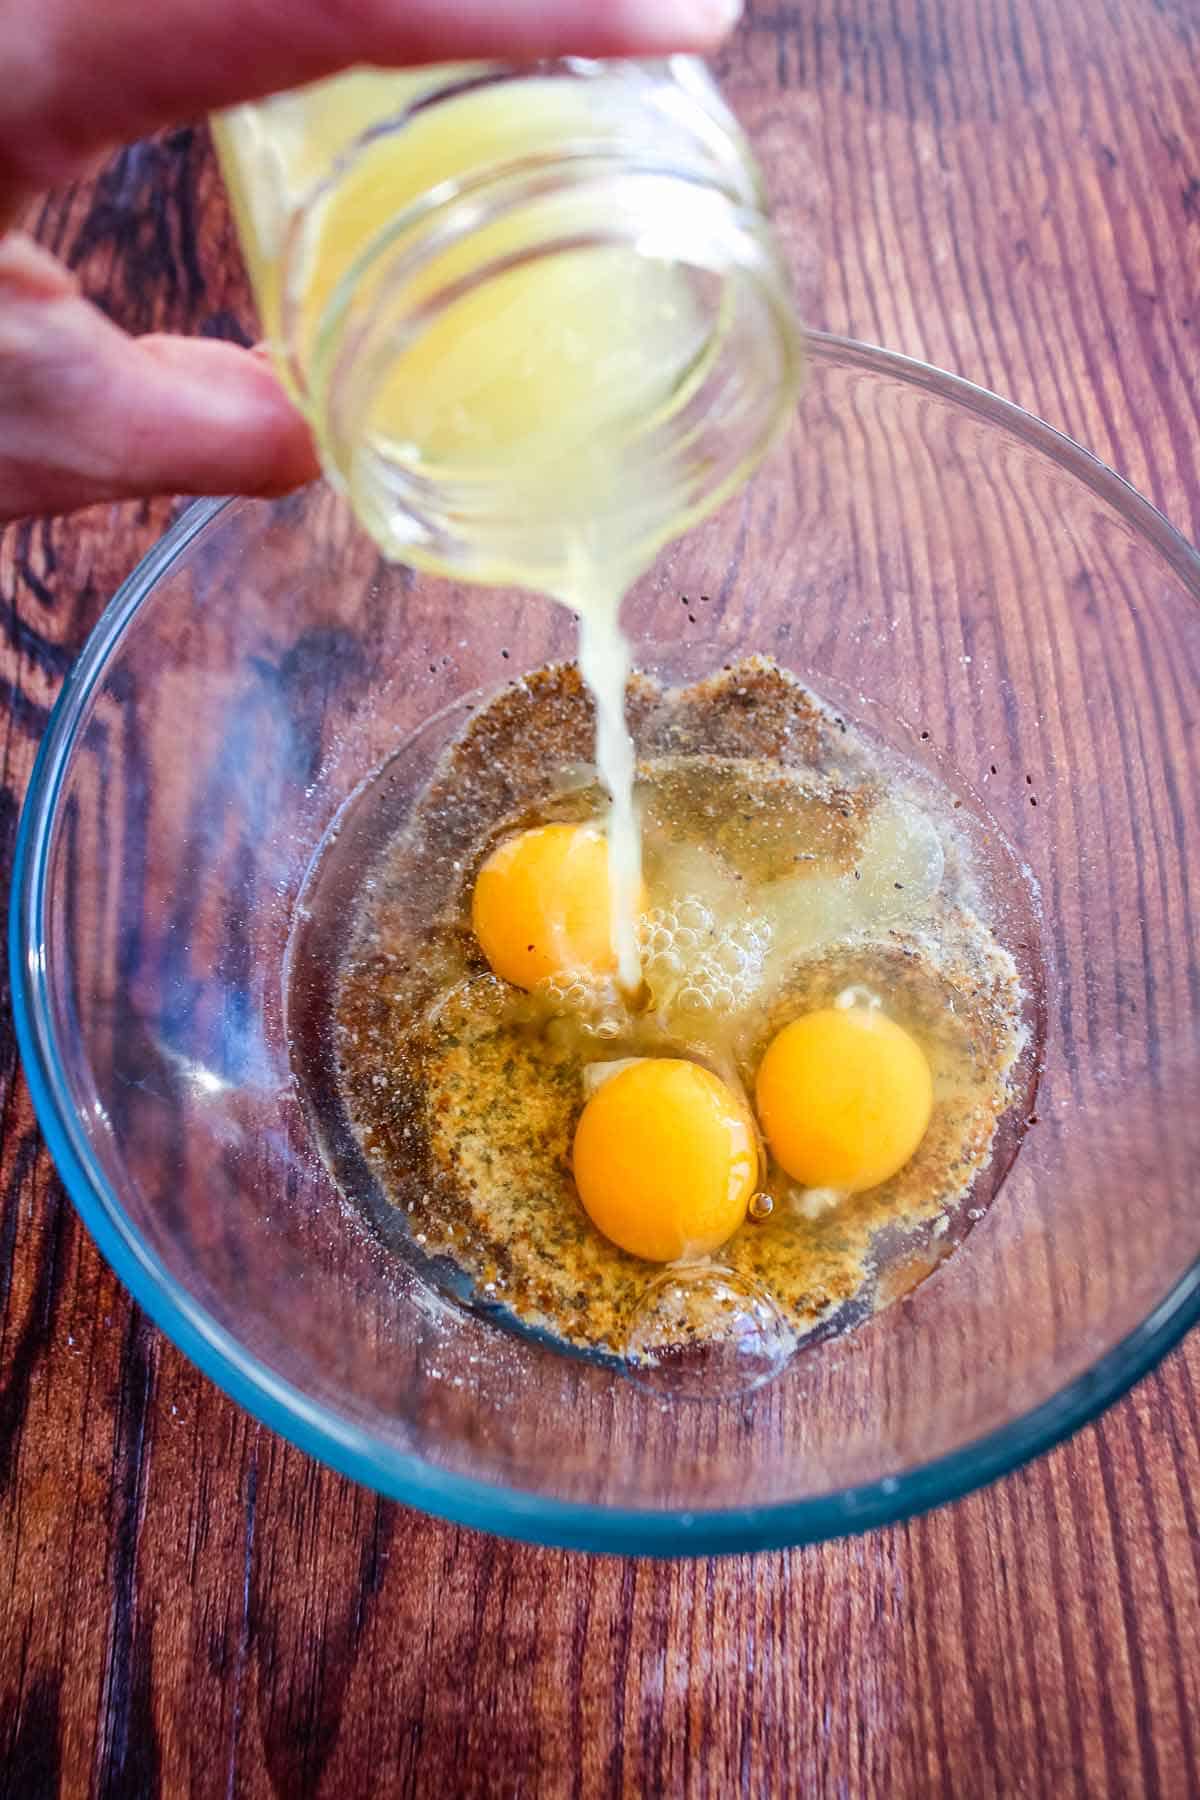 Adding the egg and lemon juice to the mixing bowl.